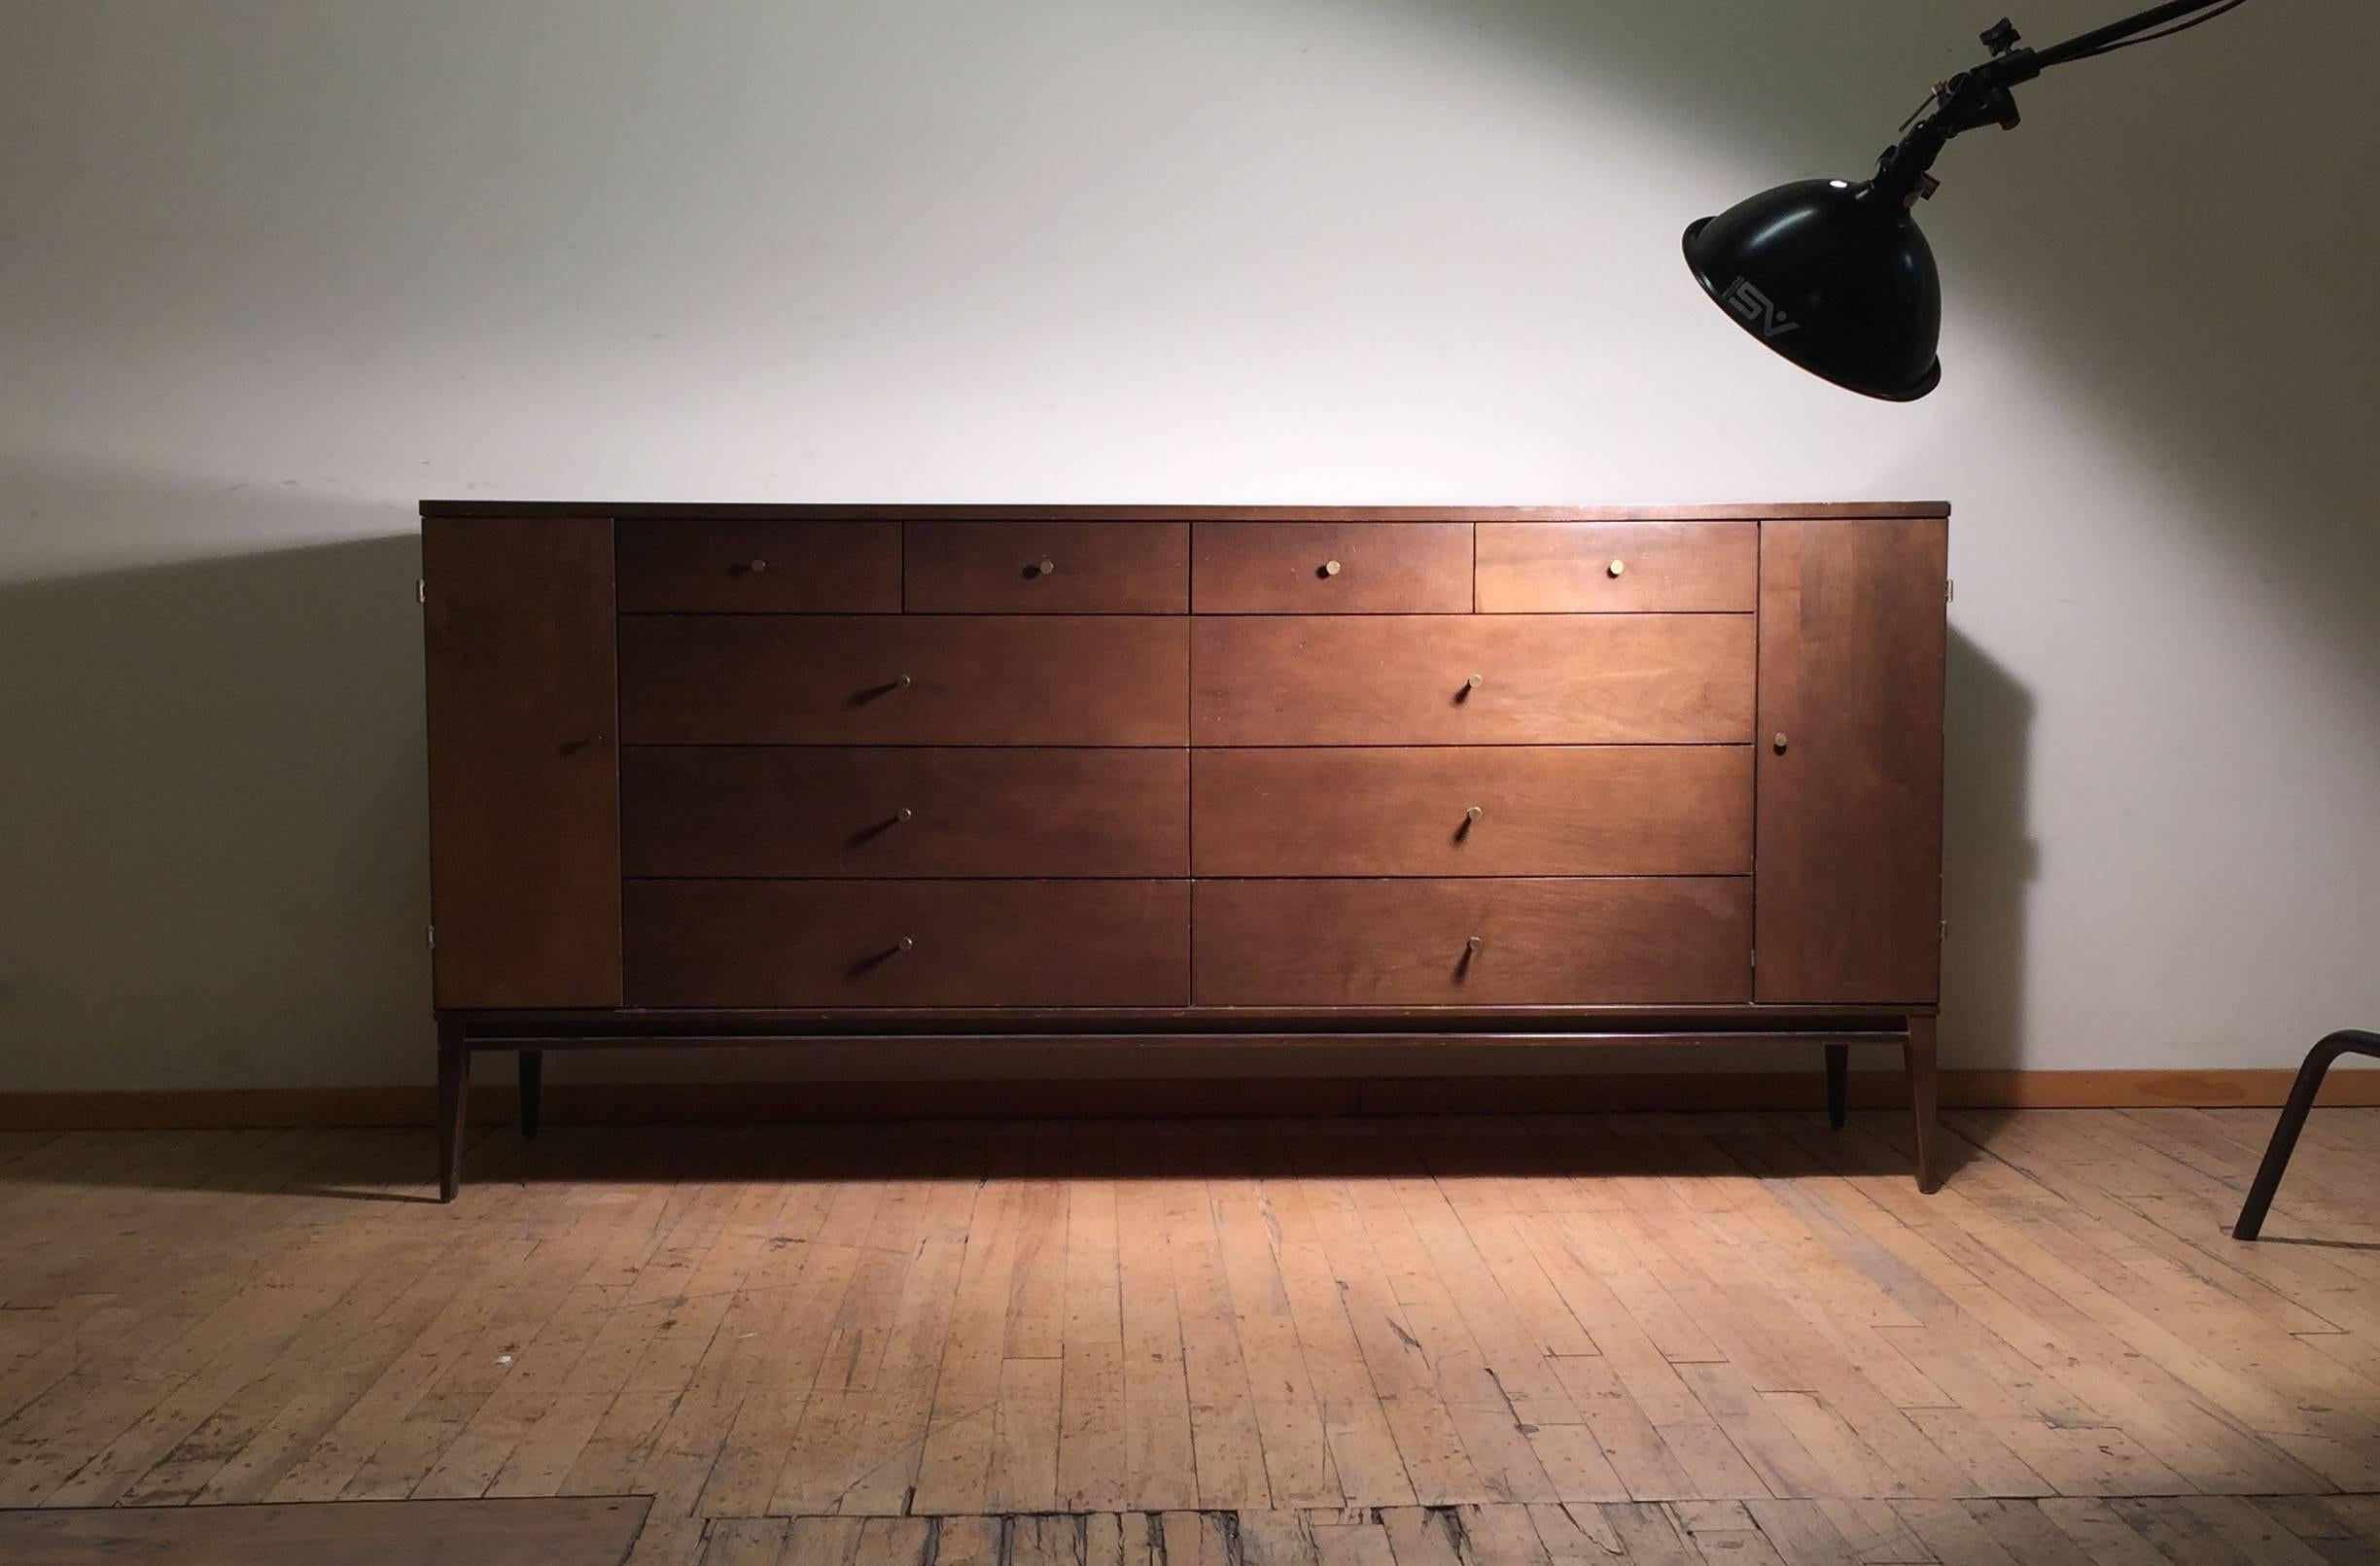 Excellent sideboard or dresser by Paul McCobb in original manufacturer specified finish. A scarce Planner Group line model for Winchendon with 20 drawers. A dramatic and sophisticated form with tapered legs.

Can be used as a dresser, sideboard,